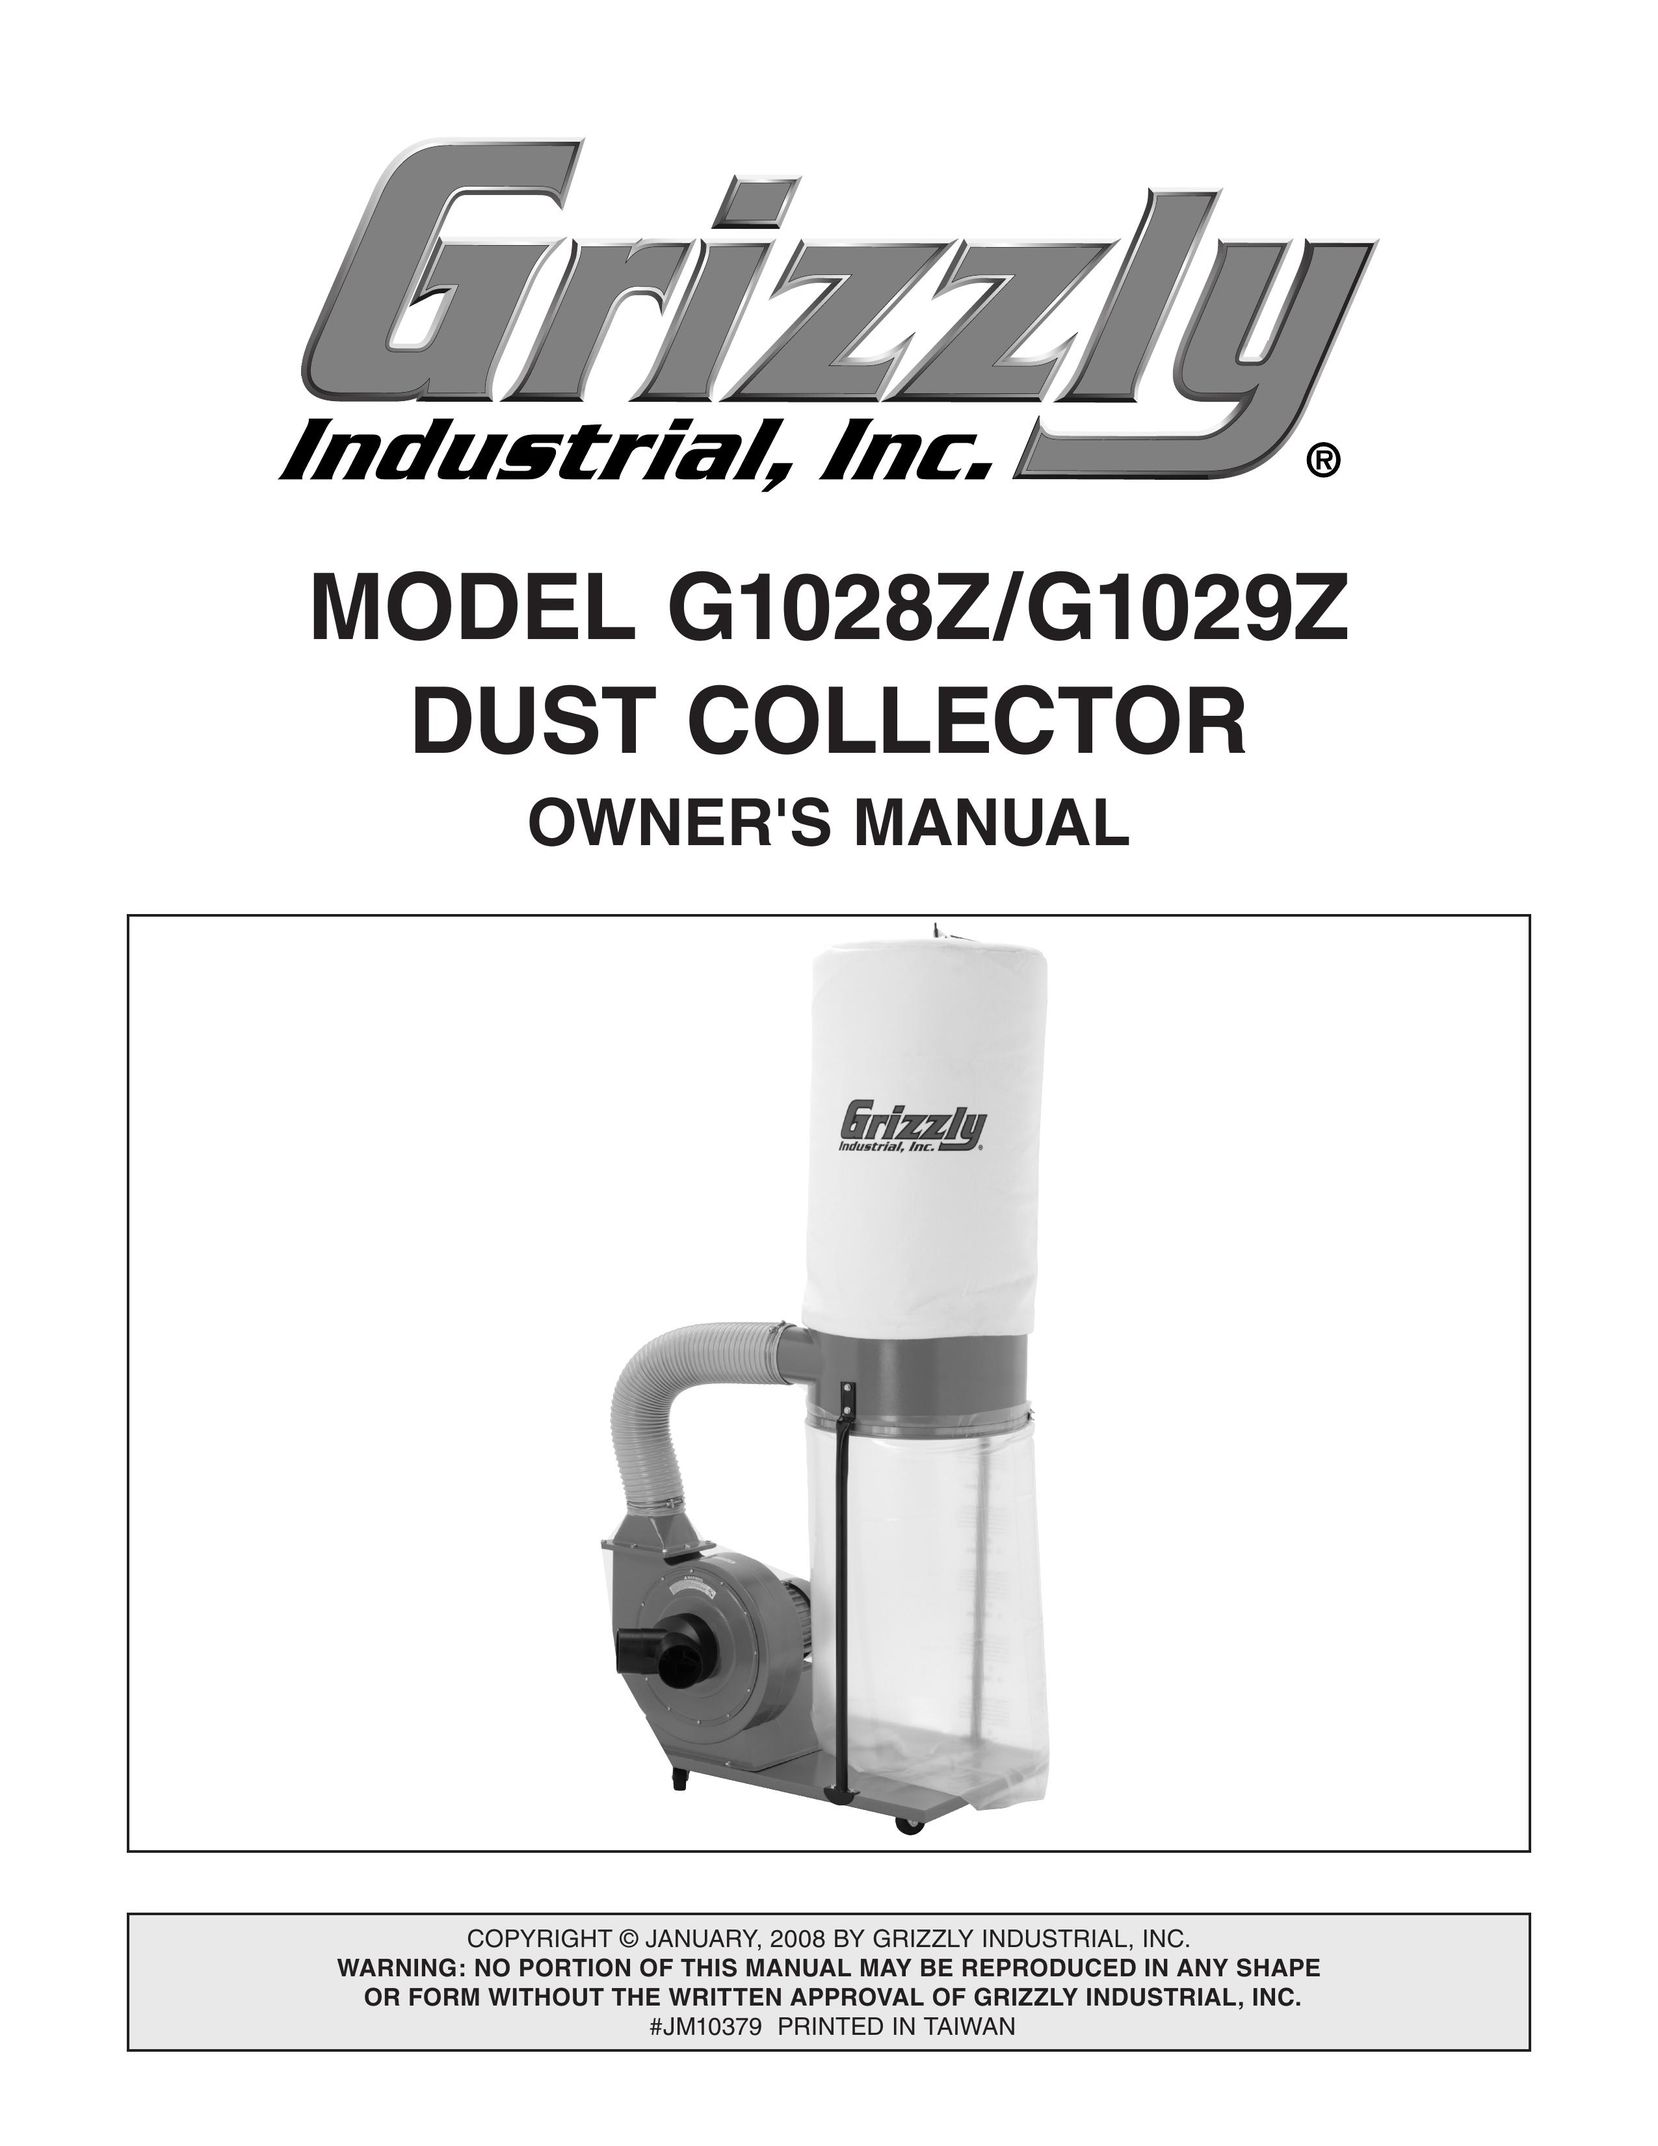 Grizzly G1028Z/G1029Z Dust Collector User Manual